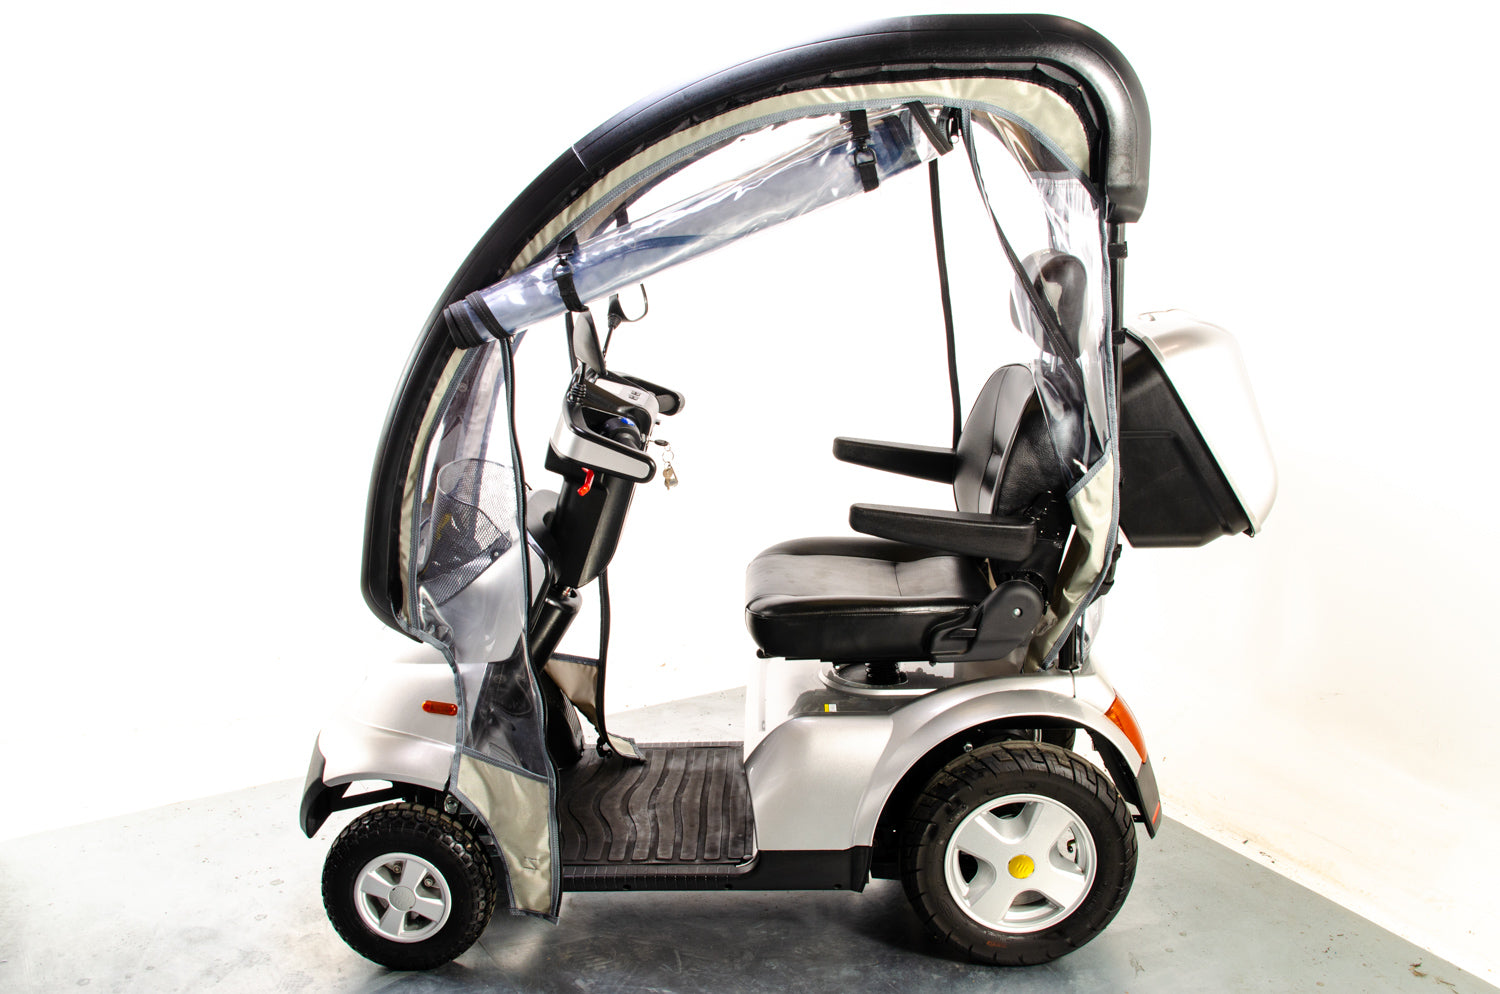 TGA Breeze S4 Canopy Used Mobility Scooter 8mph Large All-Terrain Road Legal Off-Road